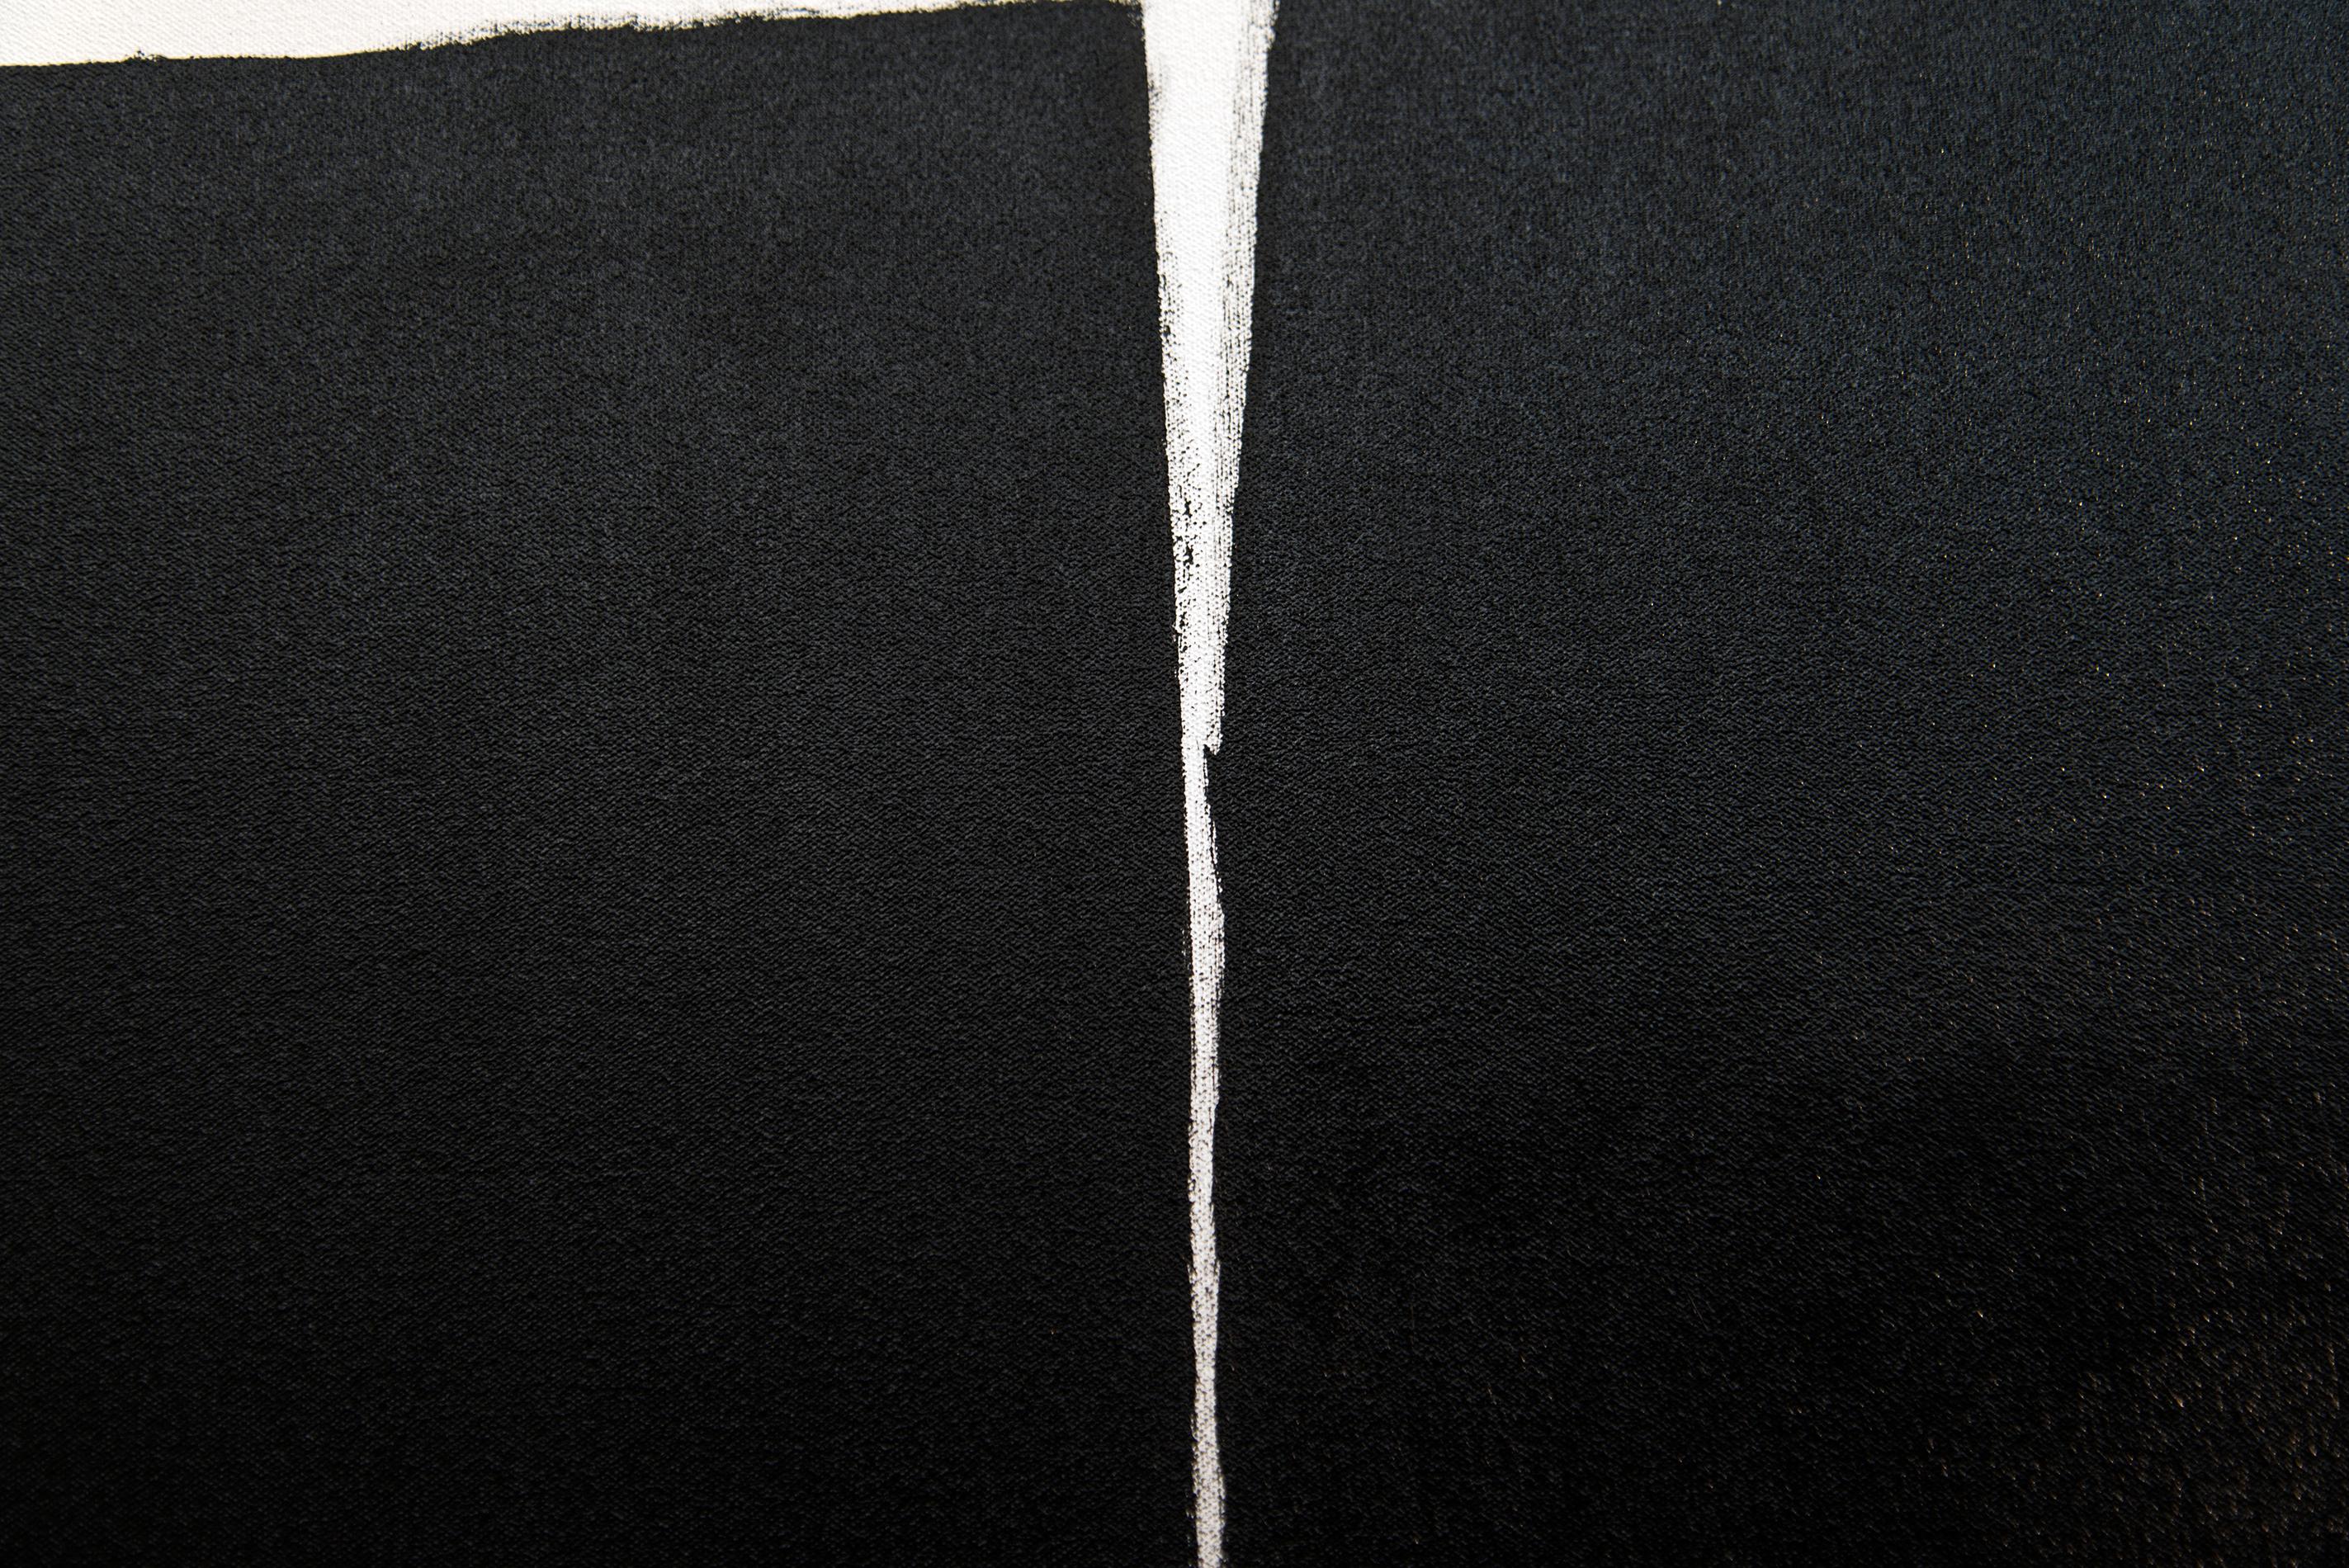 Volume 03 04 - bold, black and white, abstract minimalist, acrylic on canvas 3